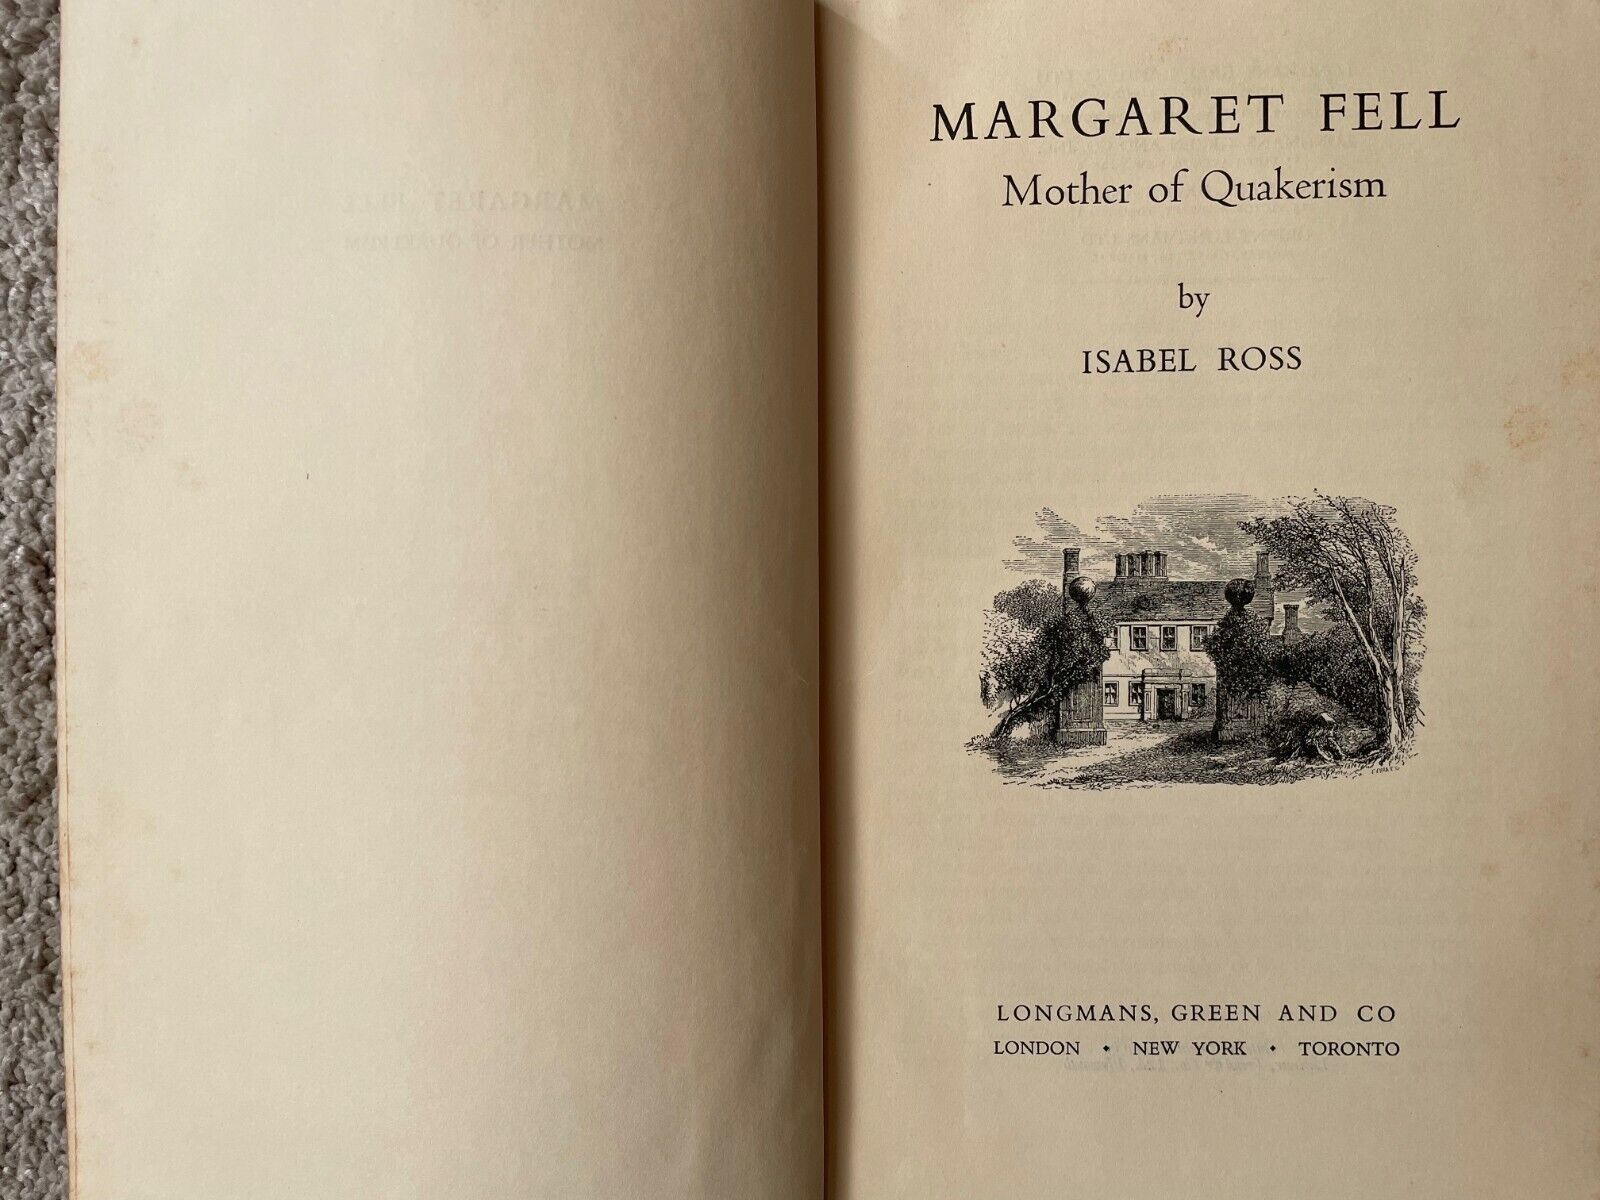 MARGARET FELL, Mother of Quakerism by Isabel Ross. Vintage 1st edition, VG copy